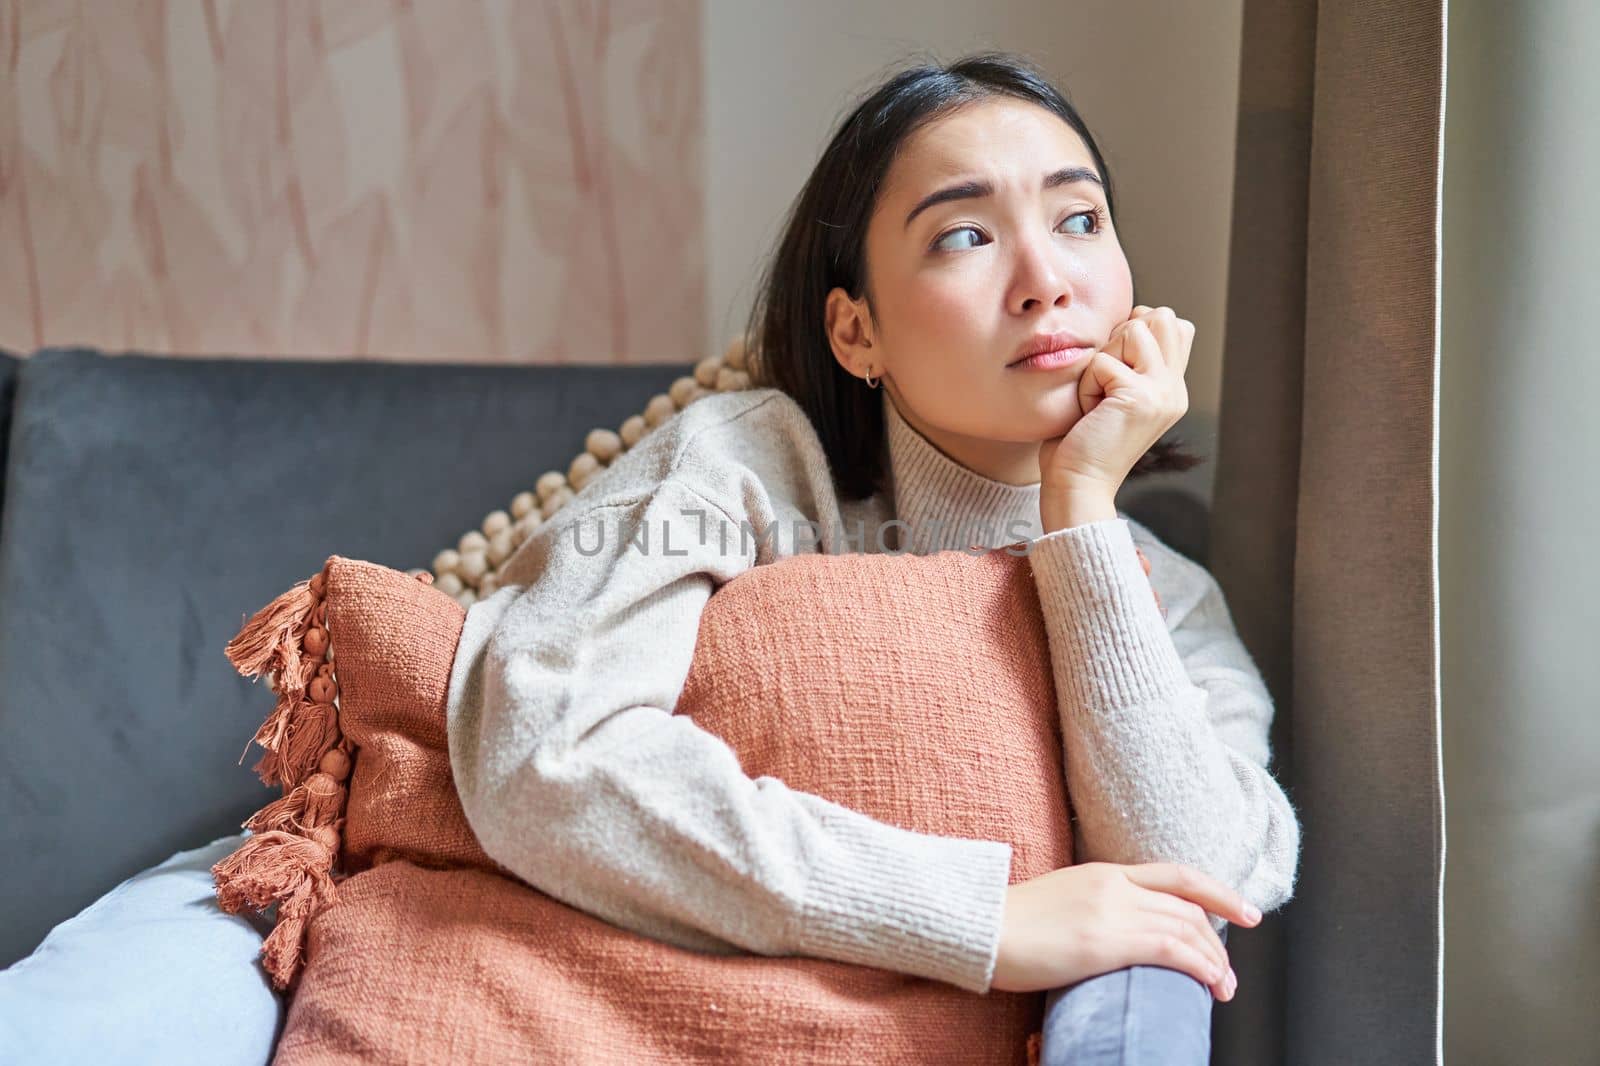 Women and wellbeing concept. Portrait of thoughtful asian woman sitting on sofa with pillow, looking aside with thinking concentrated face.